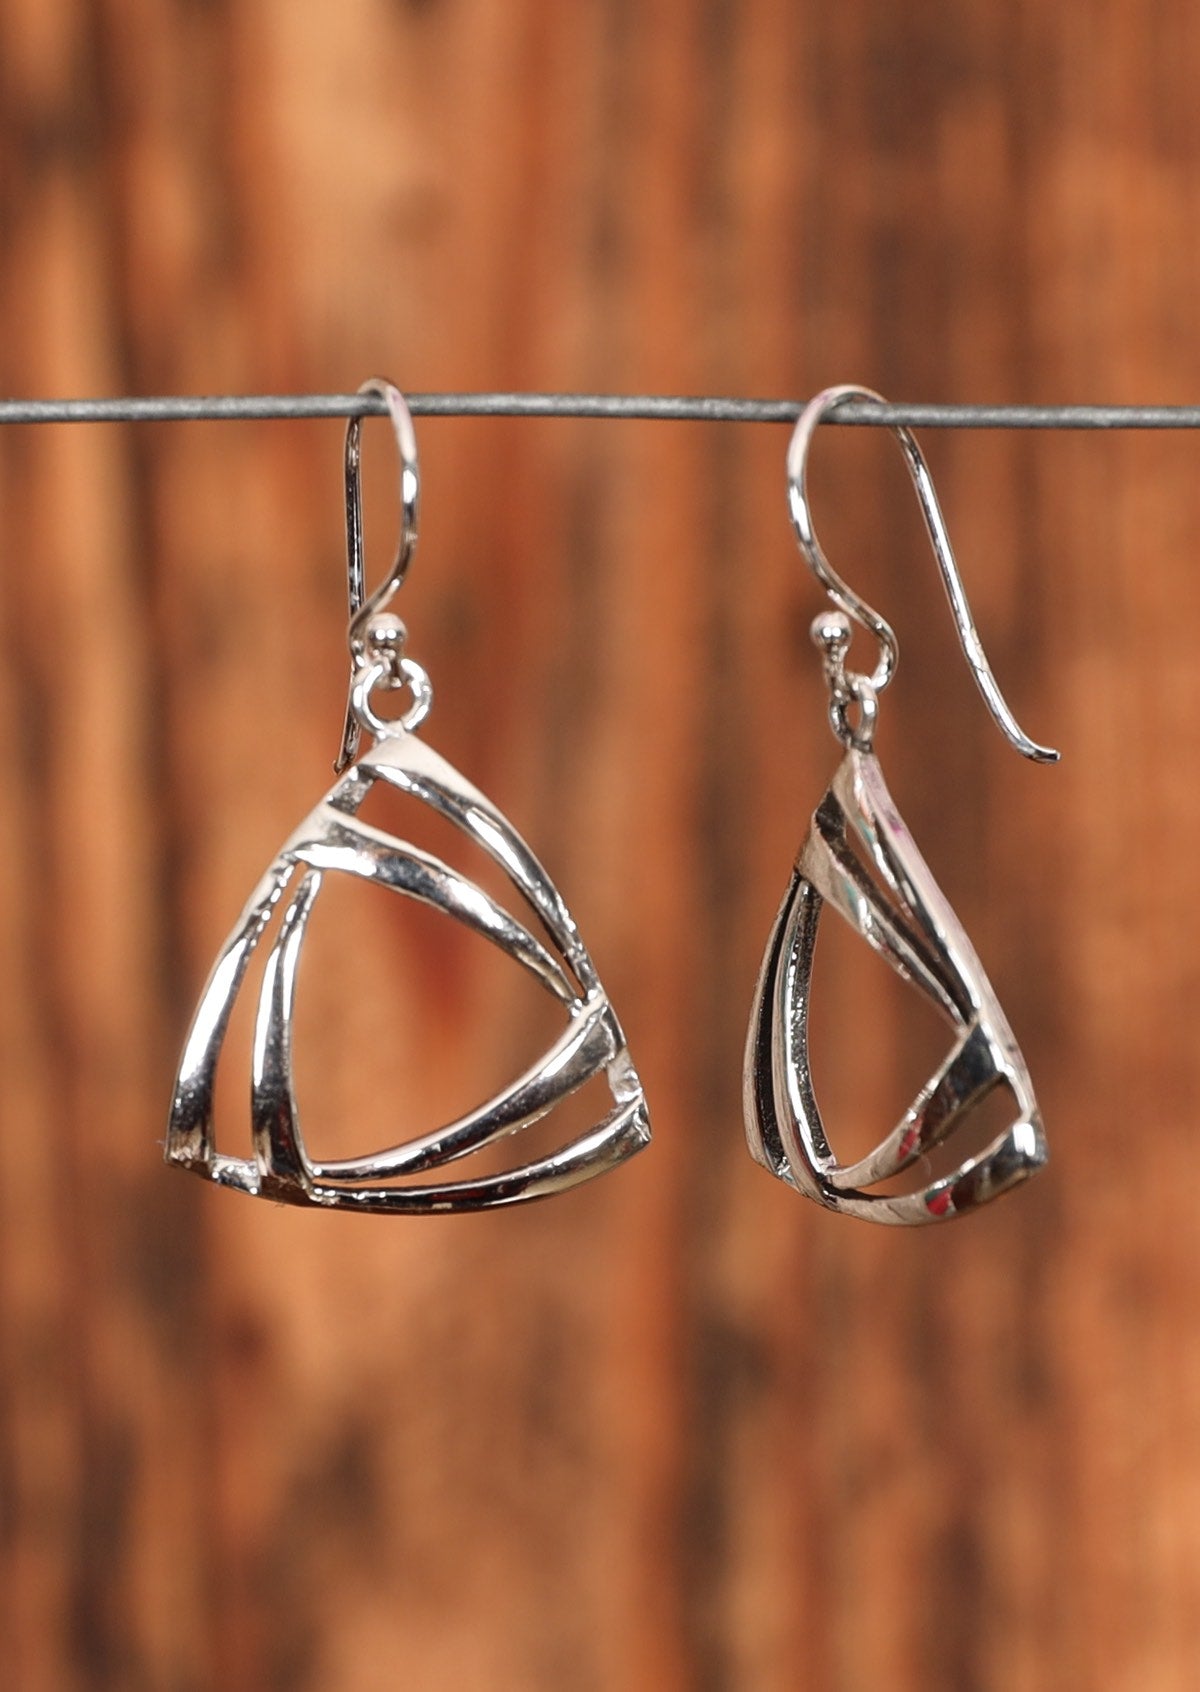 92.5% silver triangle earrings sit on a wire for display.